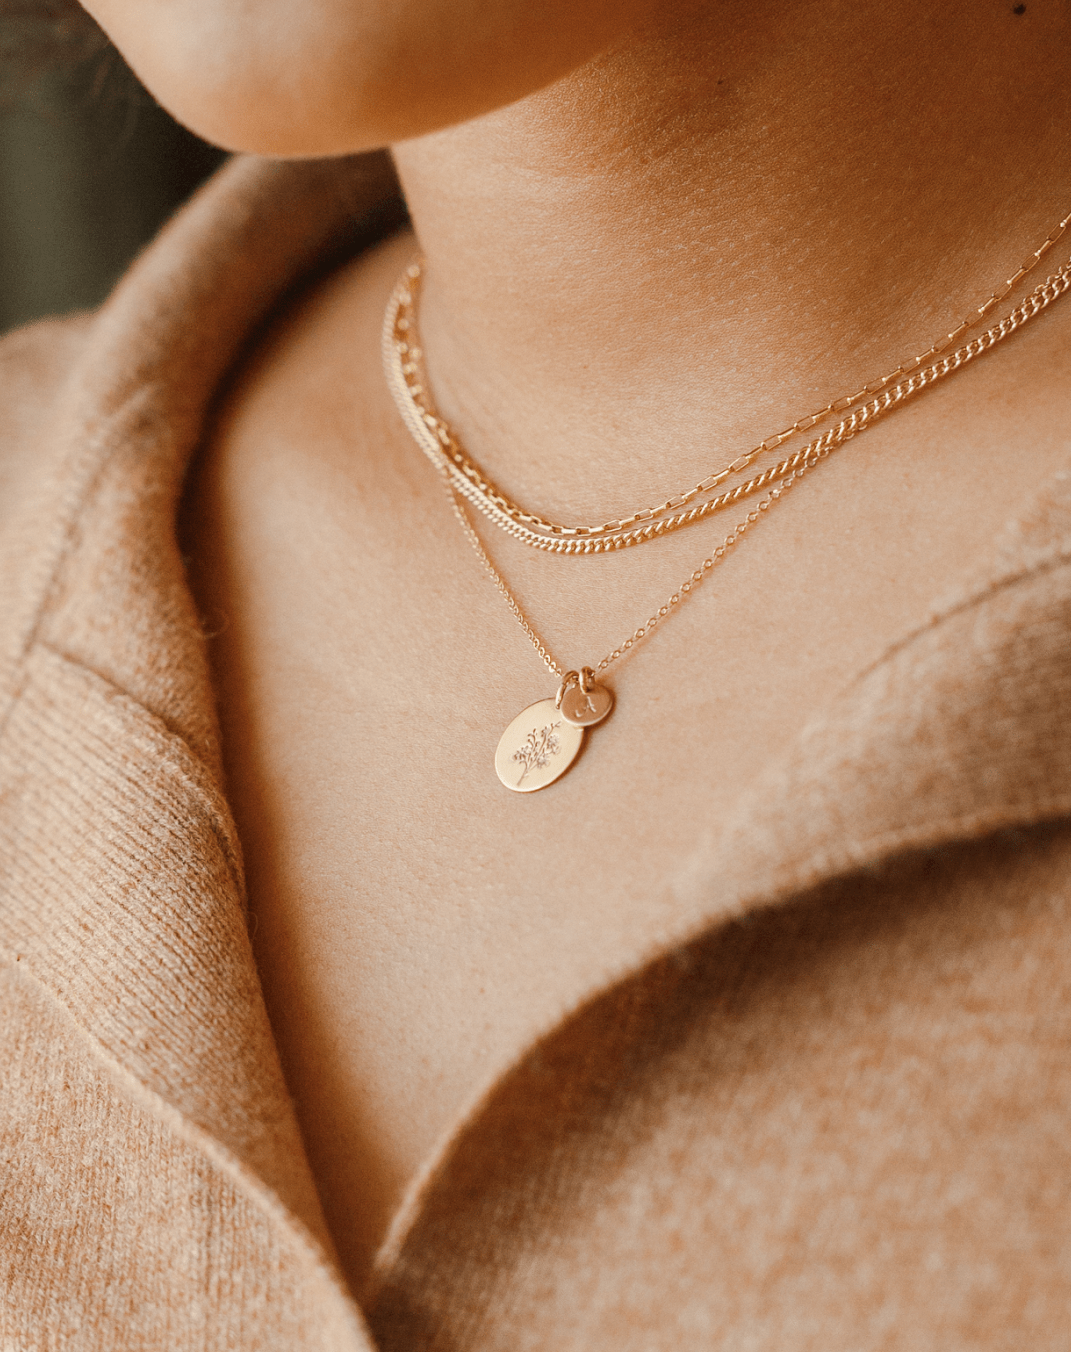  Same day shipping til 2 p.m,Christmas gift, Initial  Necklace,Large Initial Necklace,Gold Initial Pendant, Initial Necklace  Gold, Holiday gift, Large Letter Necklace : Handmade Products